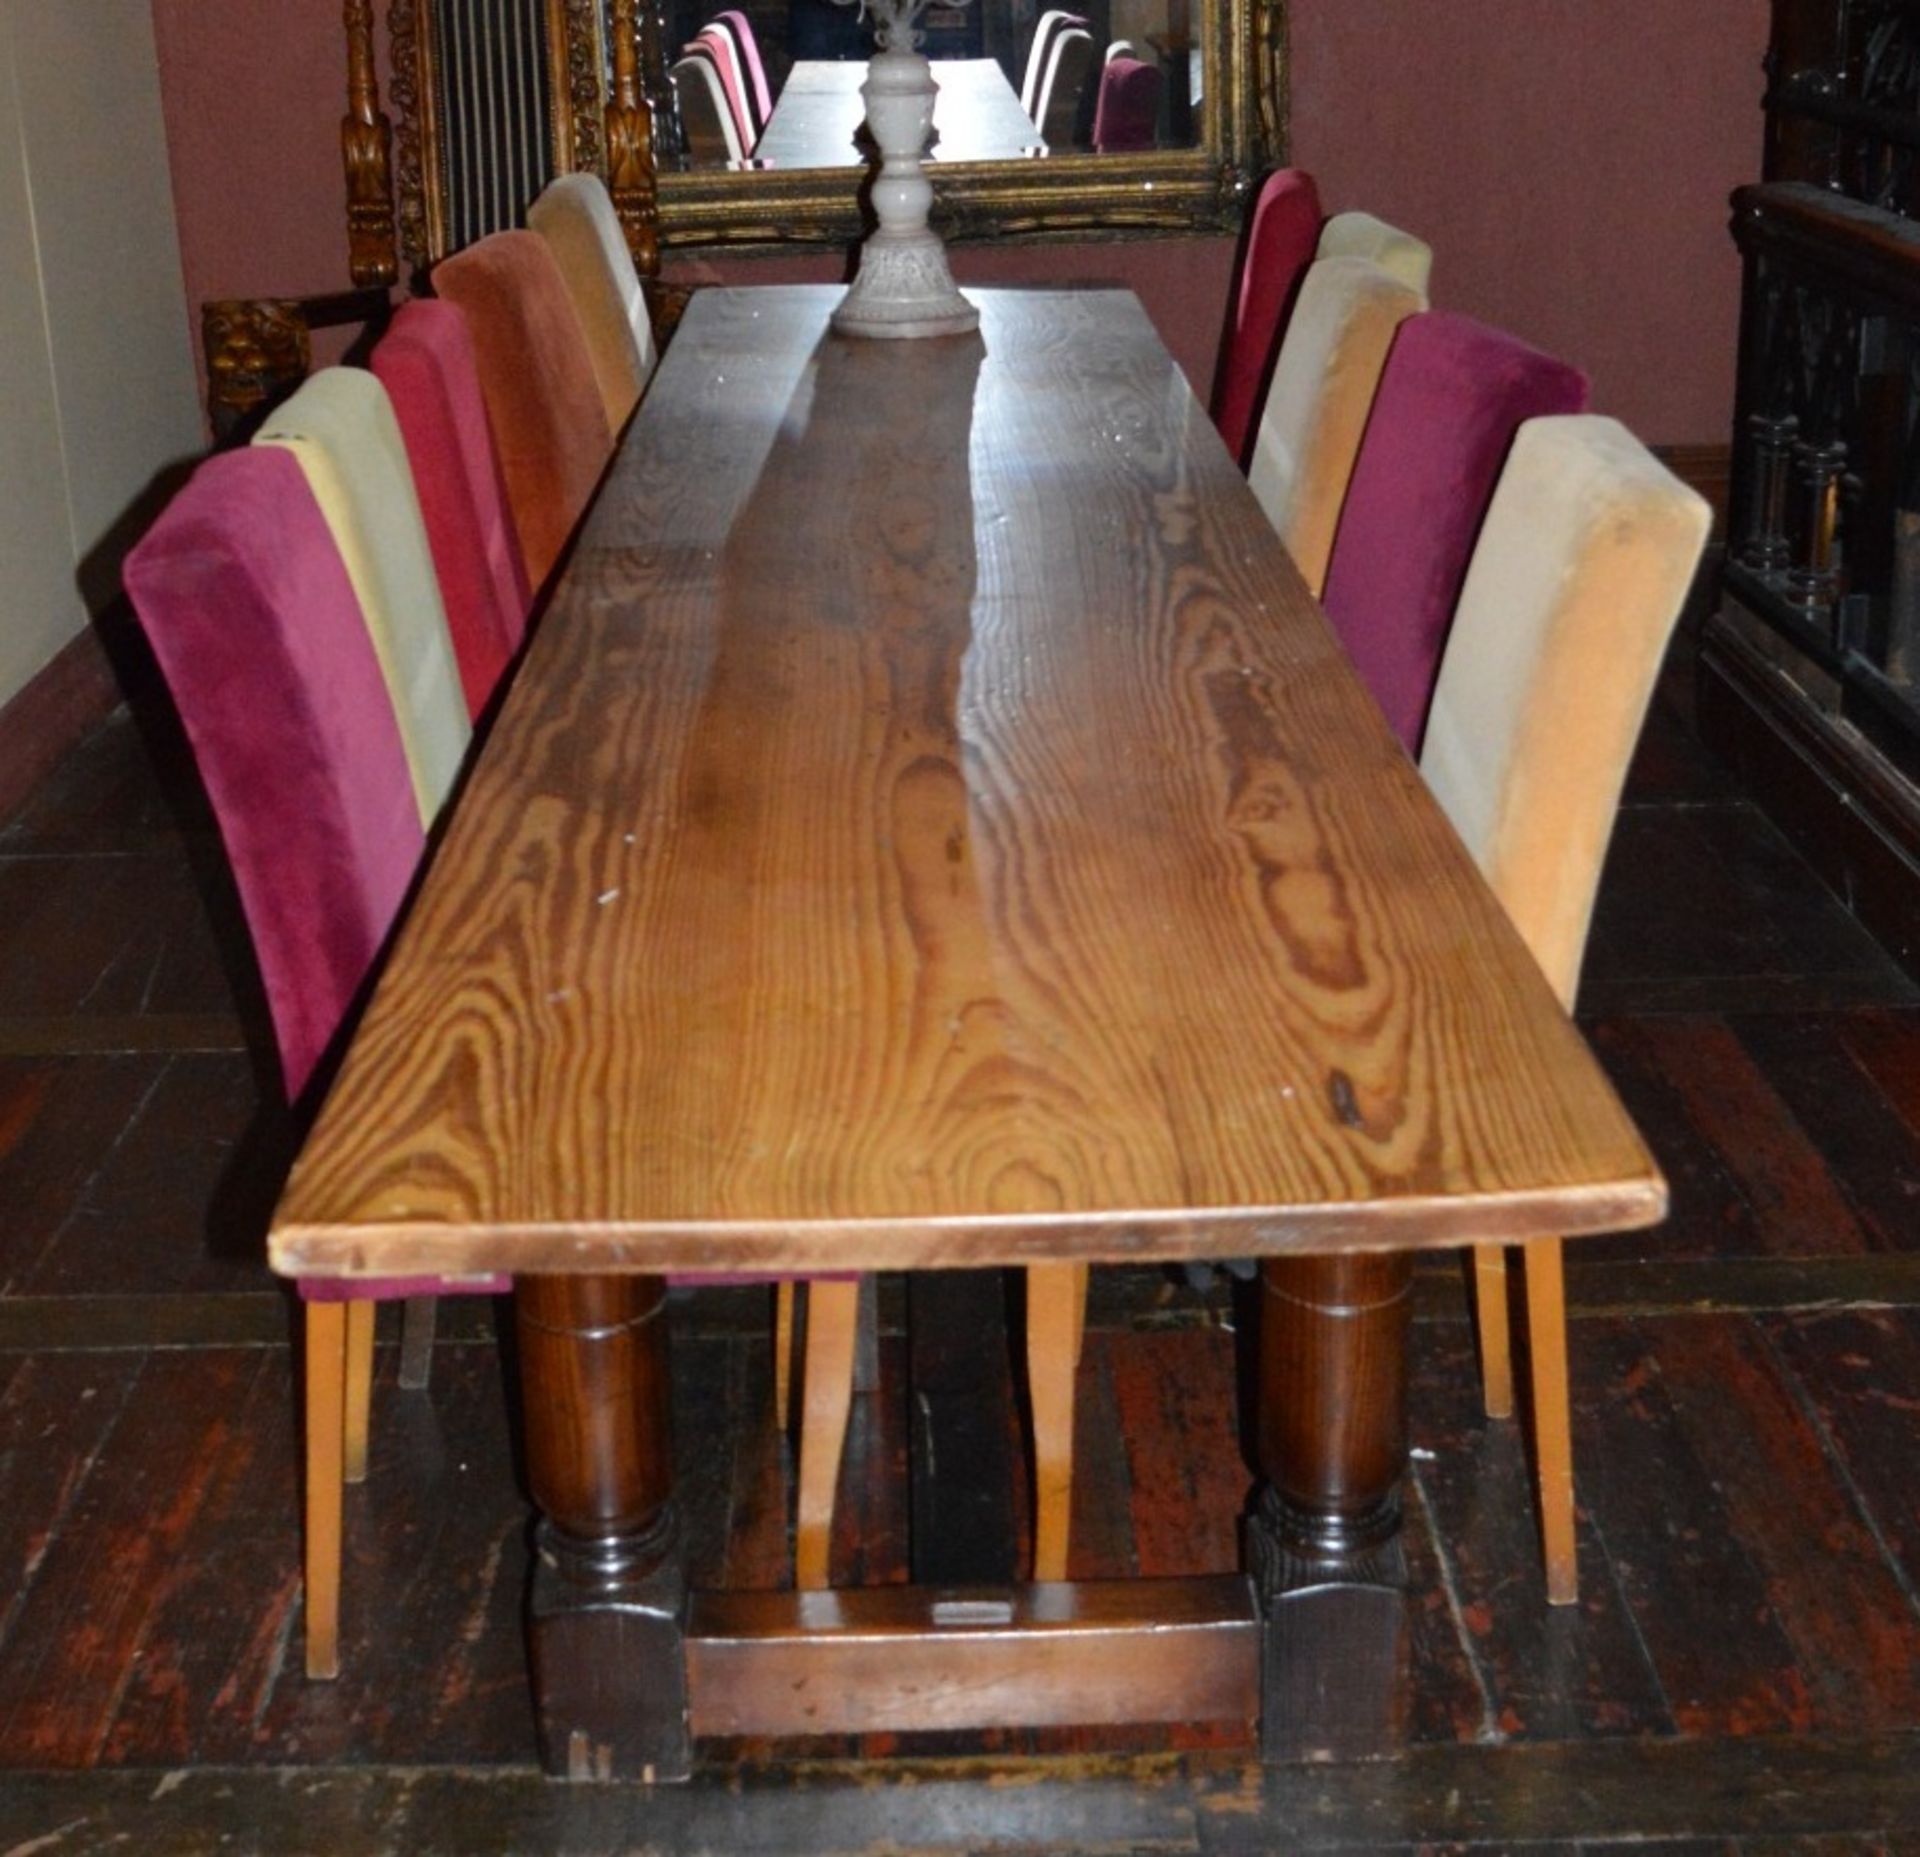 1 x Impressive Antique and Very Long Refectory Table - Features a single piece top which is full